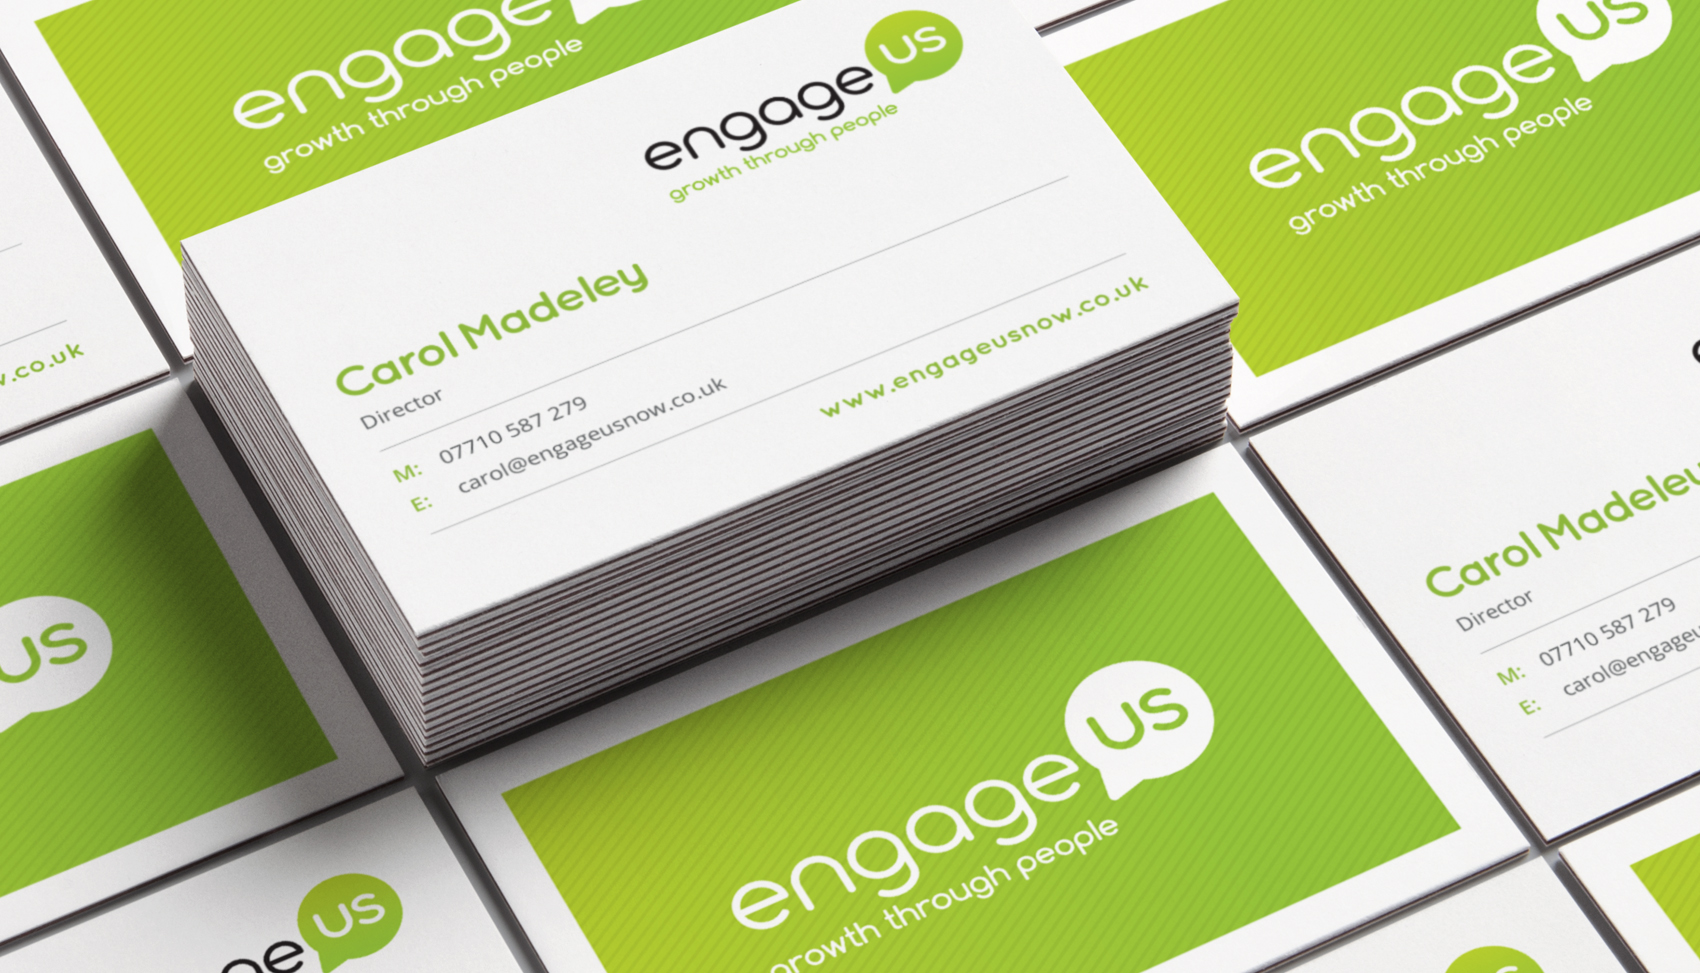 http://Engage%20us%20-%20Business%20Cards